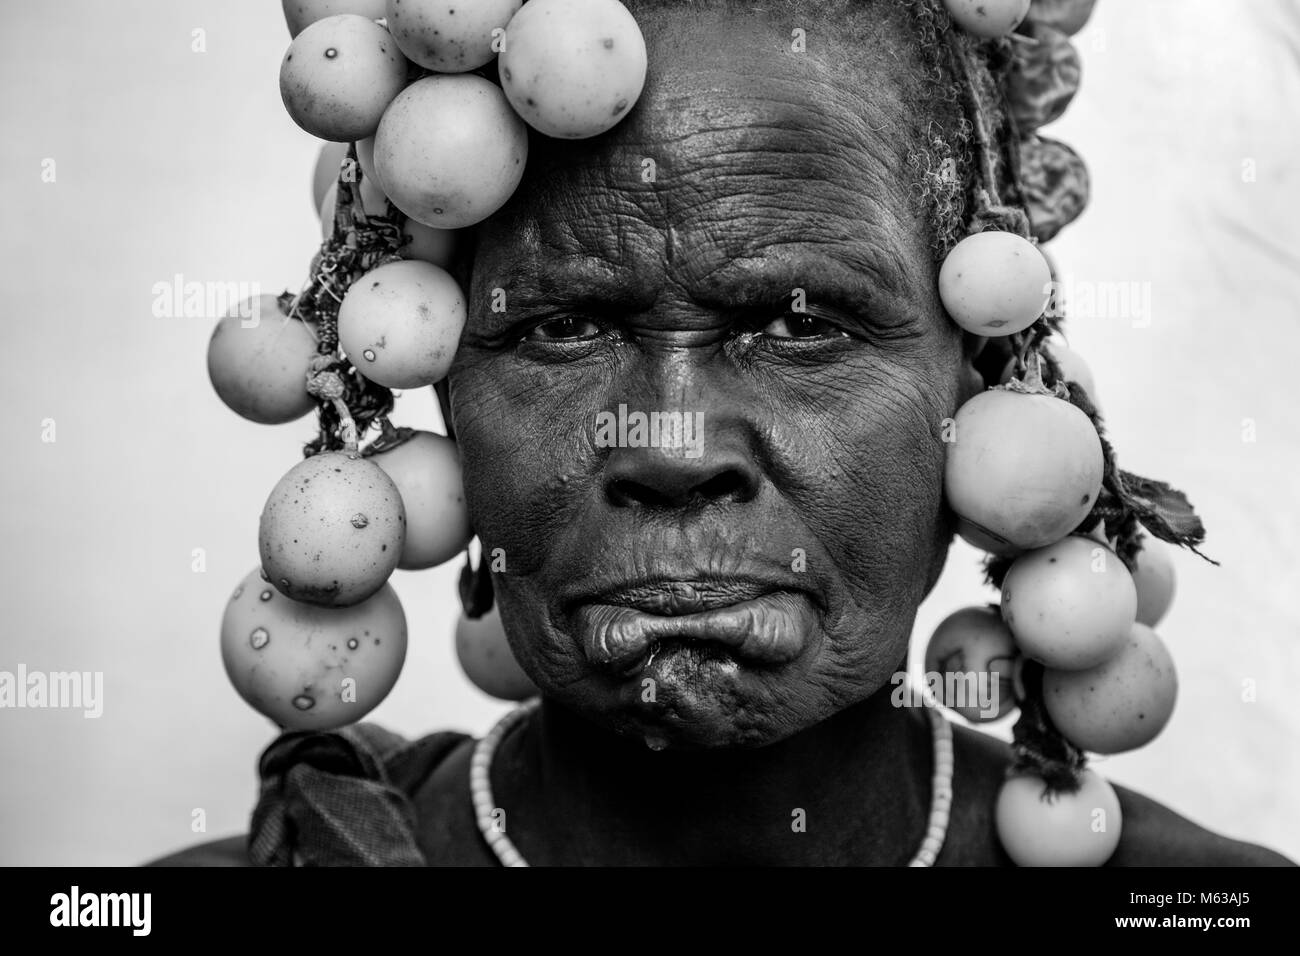 A Portrait Of An Elderly Woman From The Mursi Tribe, Mursi Village, Omo Valley, Ethiopia Stock Photo